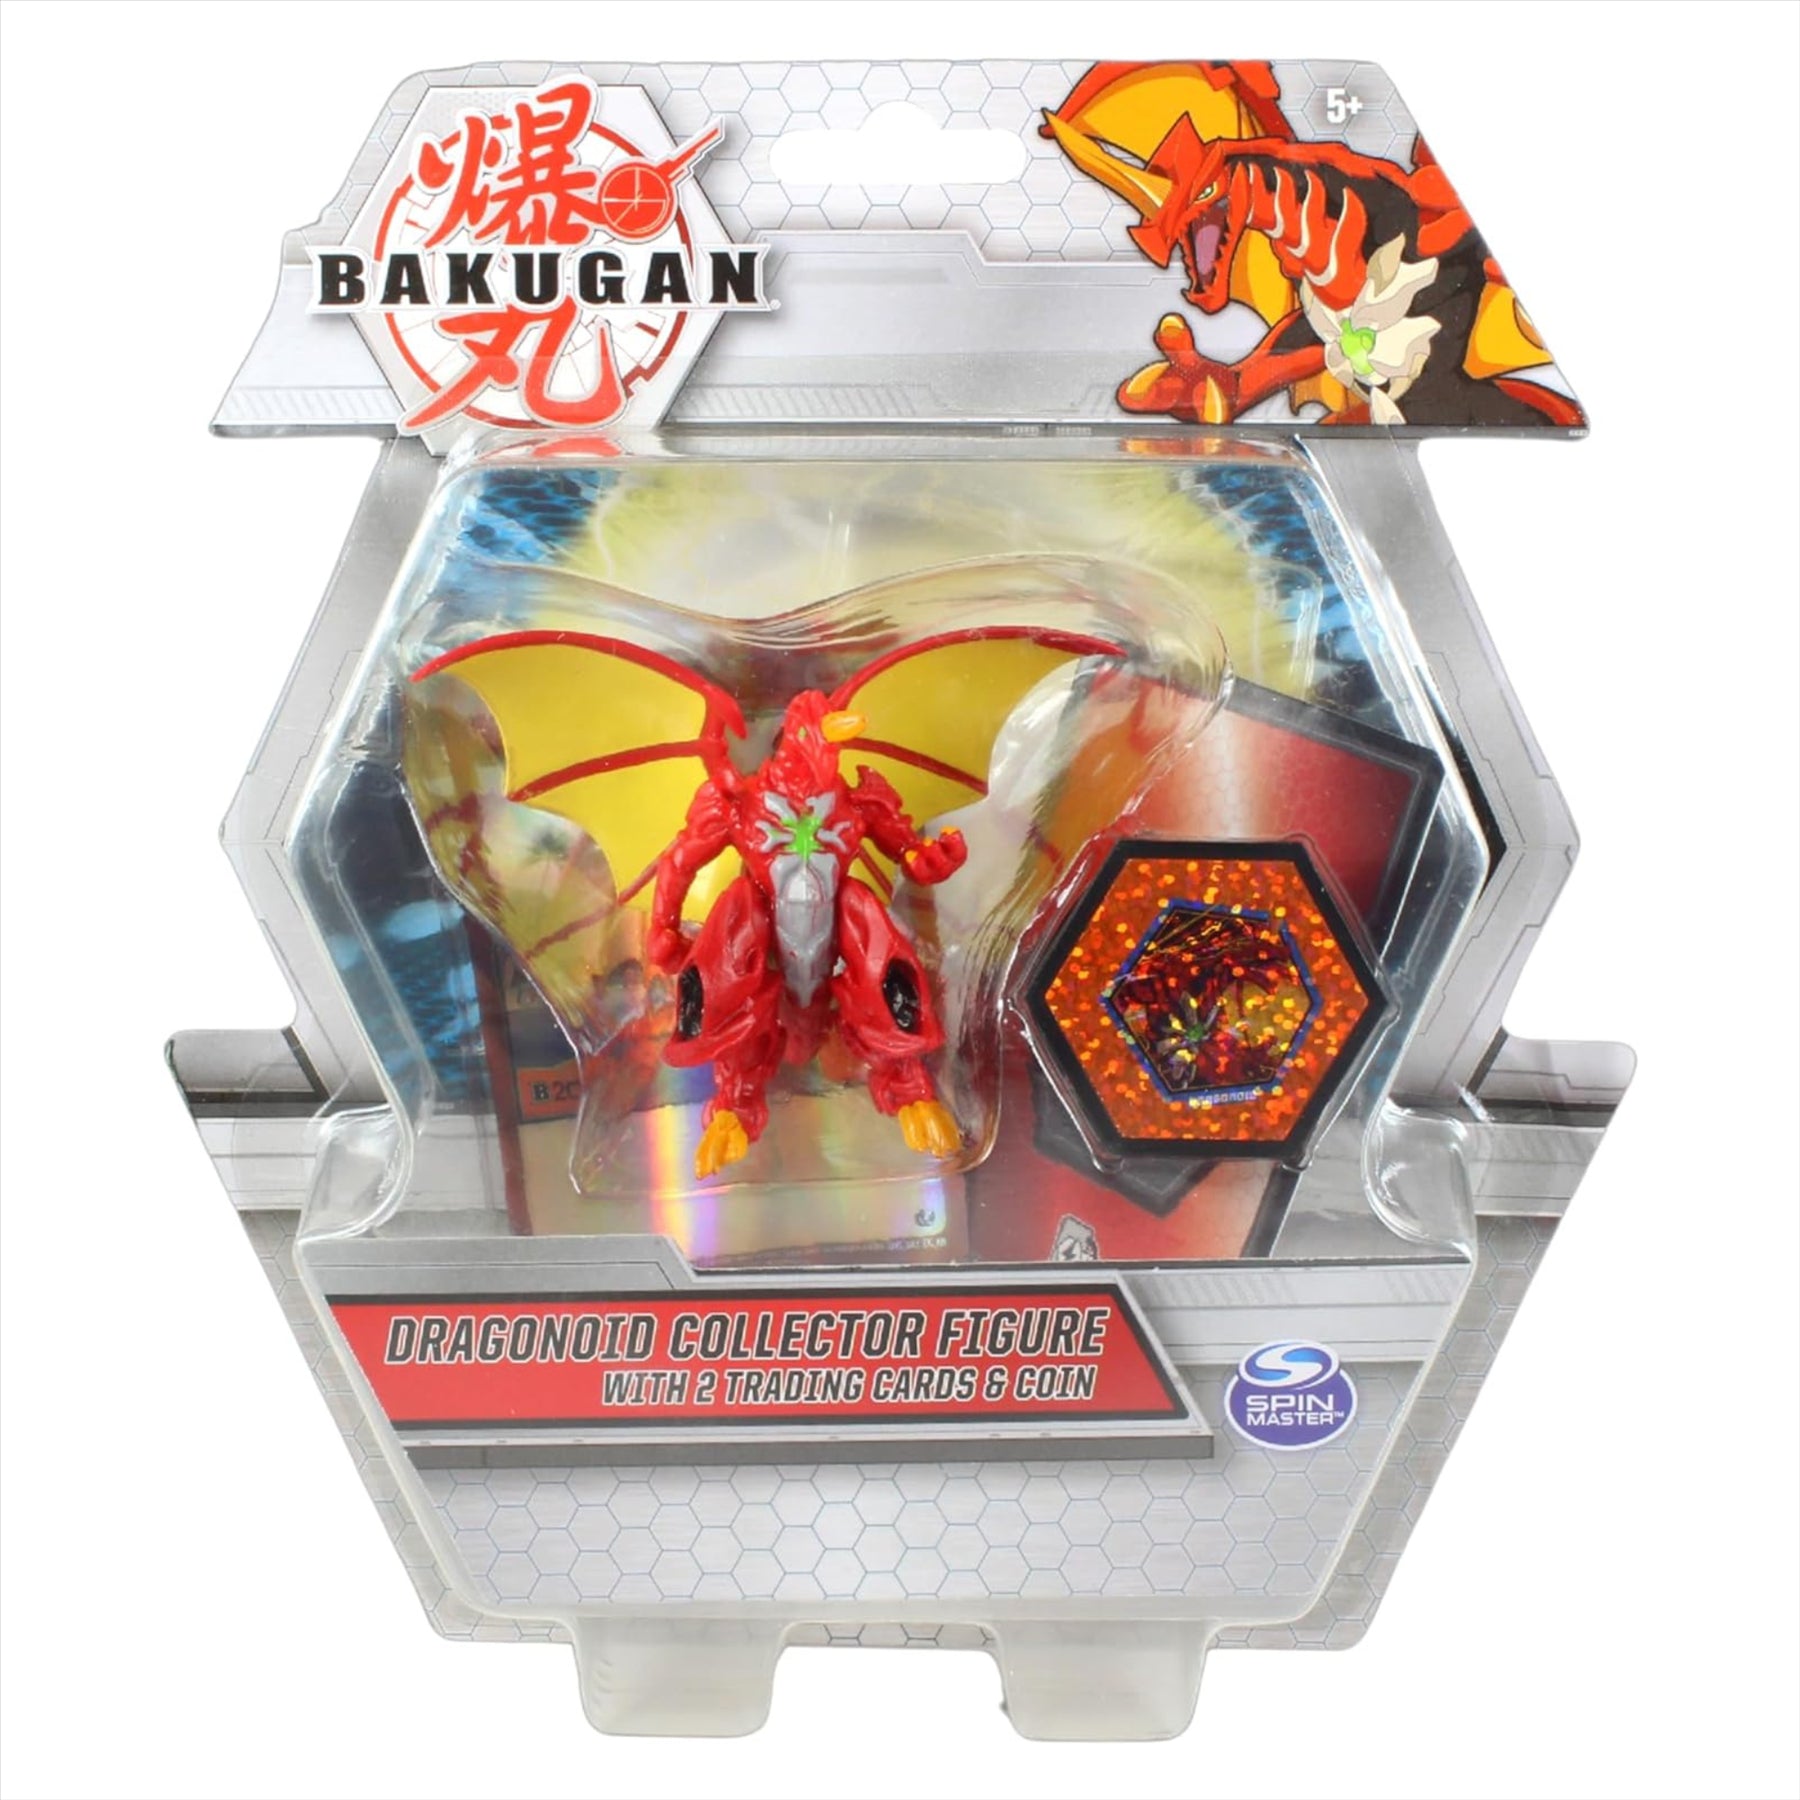 Bakugan - Deluxe Collector Figure Bundles With 2x Cards & Coin In Each Pack - Dragonoid Red & Hydorous Dark Blue - Toptoys2u